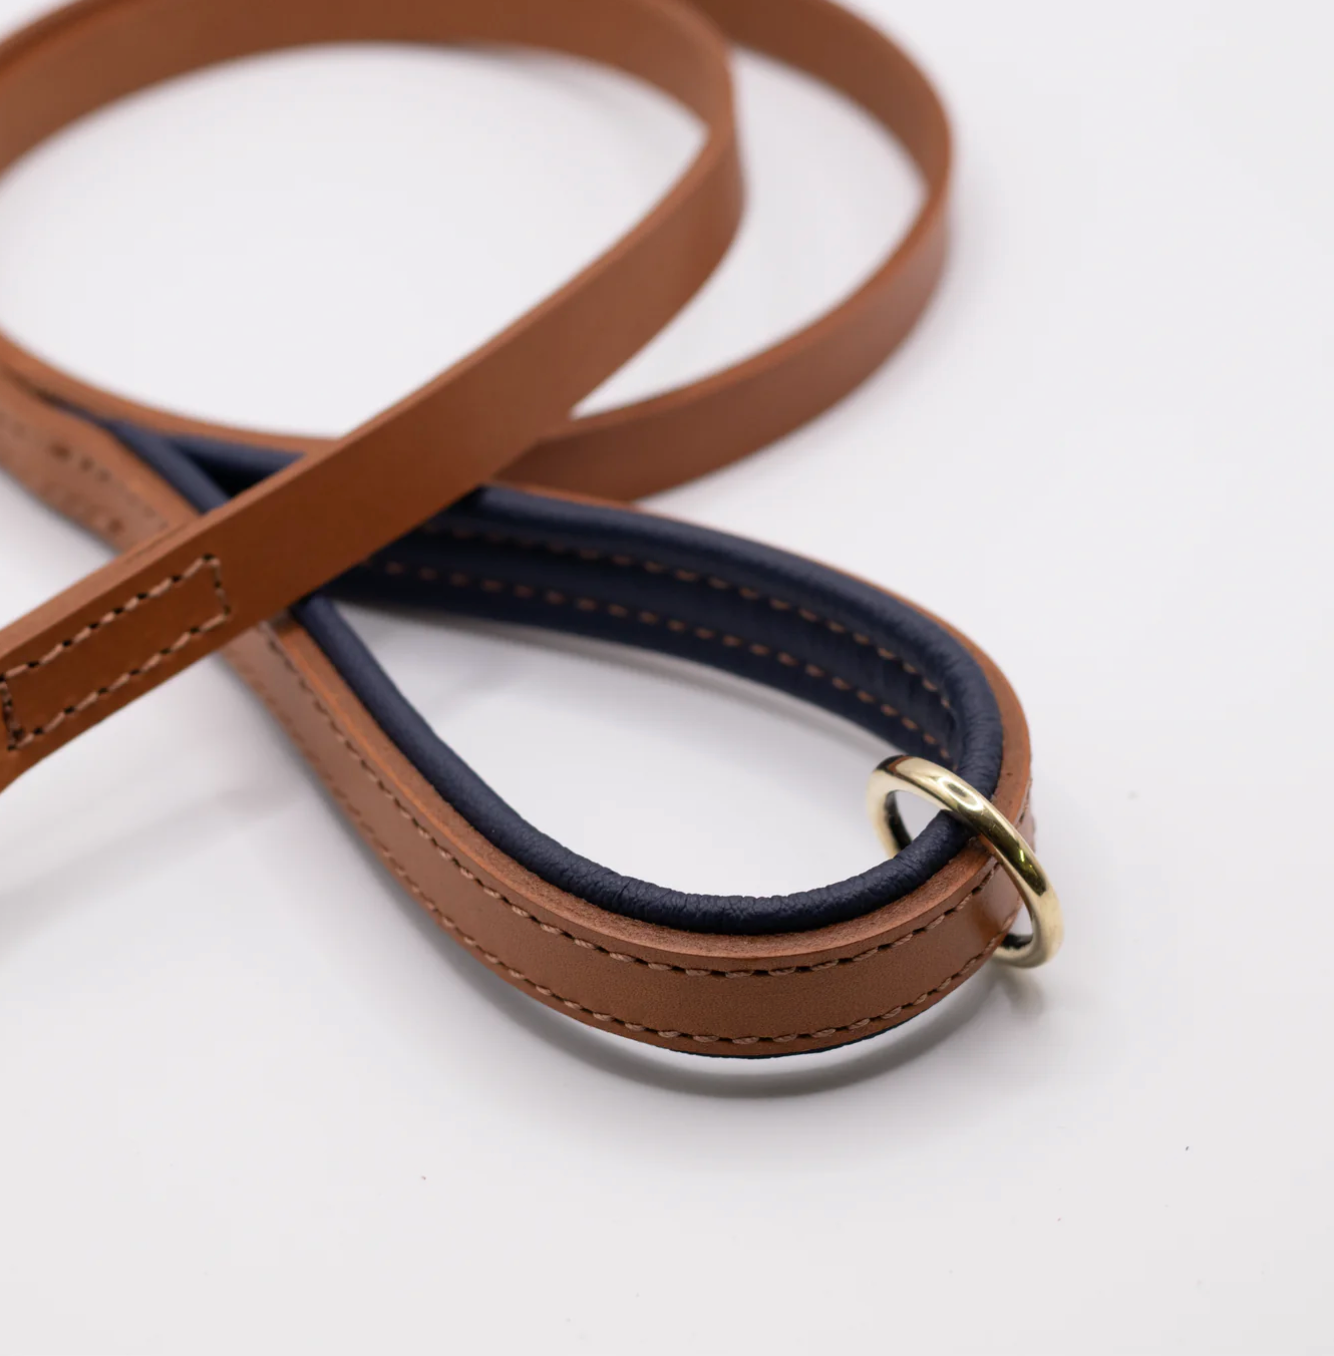 Handmade in Britain padded leather dog lead